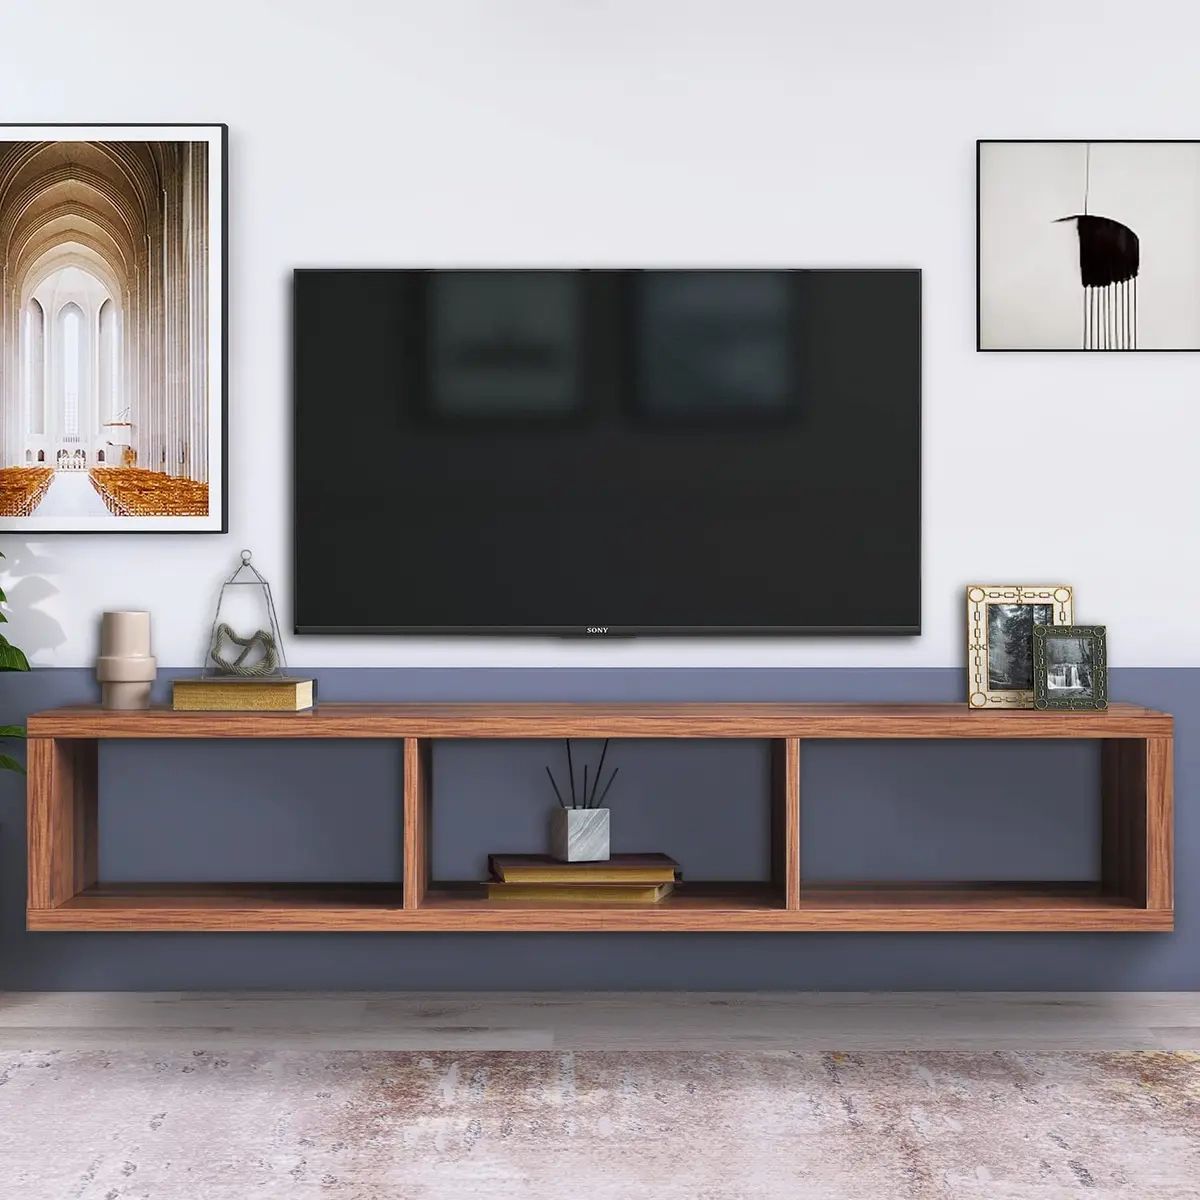 Floating Tv Shelf Wall Mounted,Modern Wood Wall Mounted Tv Stand  Entertainment C | Ebay Regarding Floating Stands For Tvs (View 13 of 15)